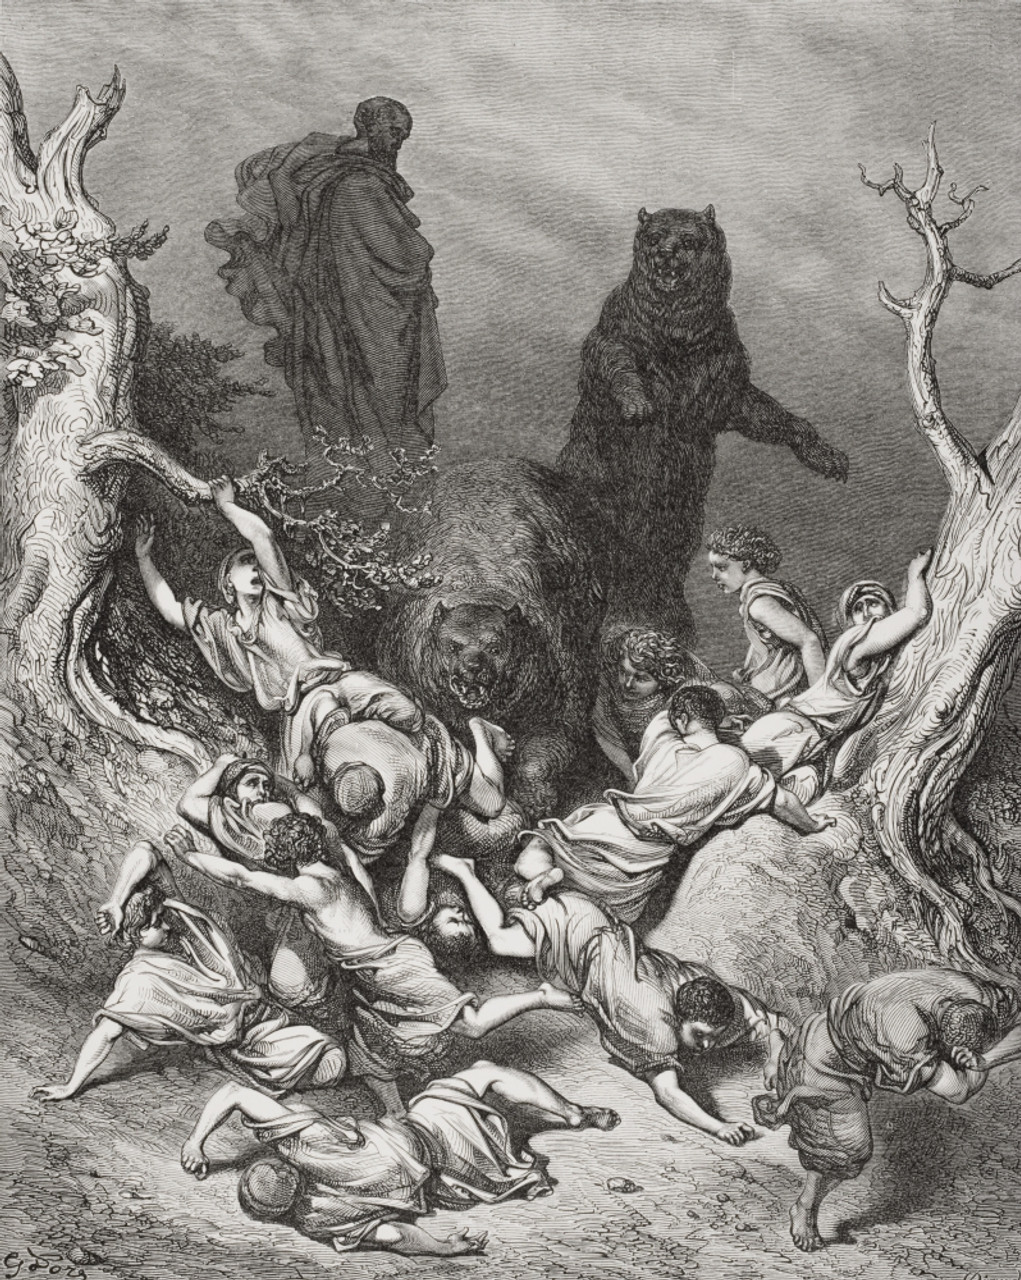 Engraving by Gustave Dore 1832-1883 French artist and illustrator